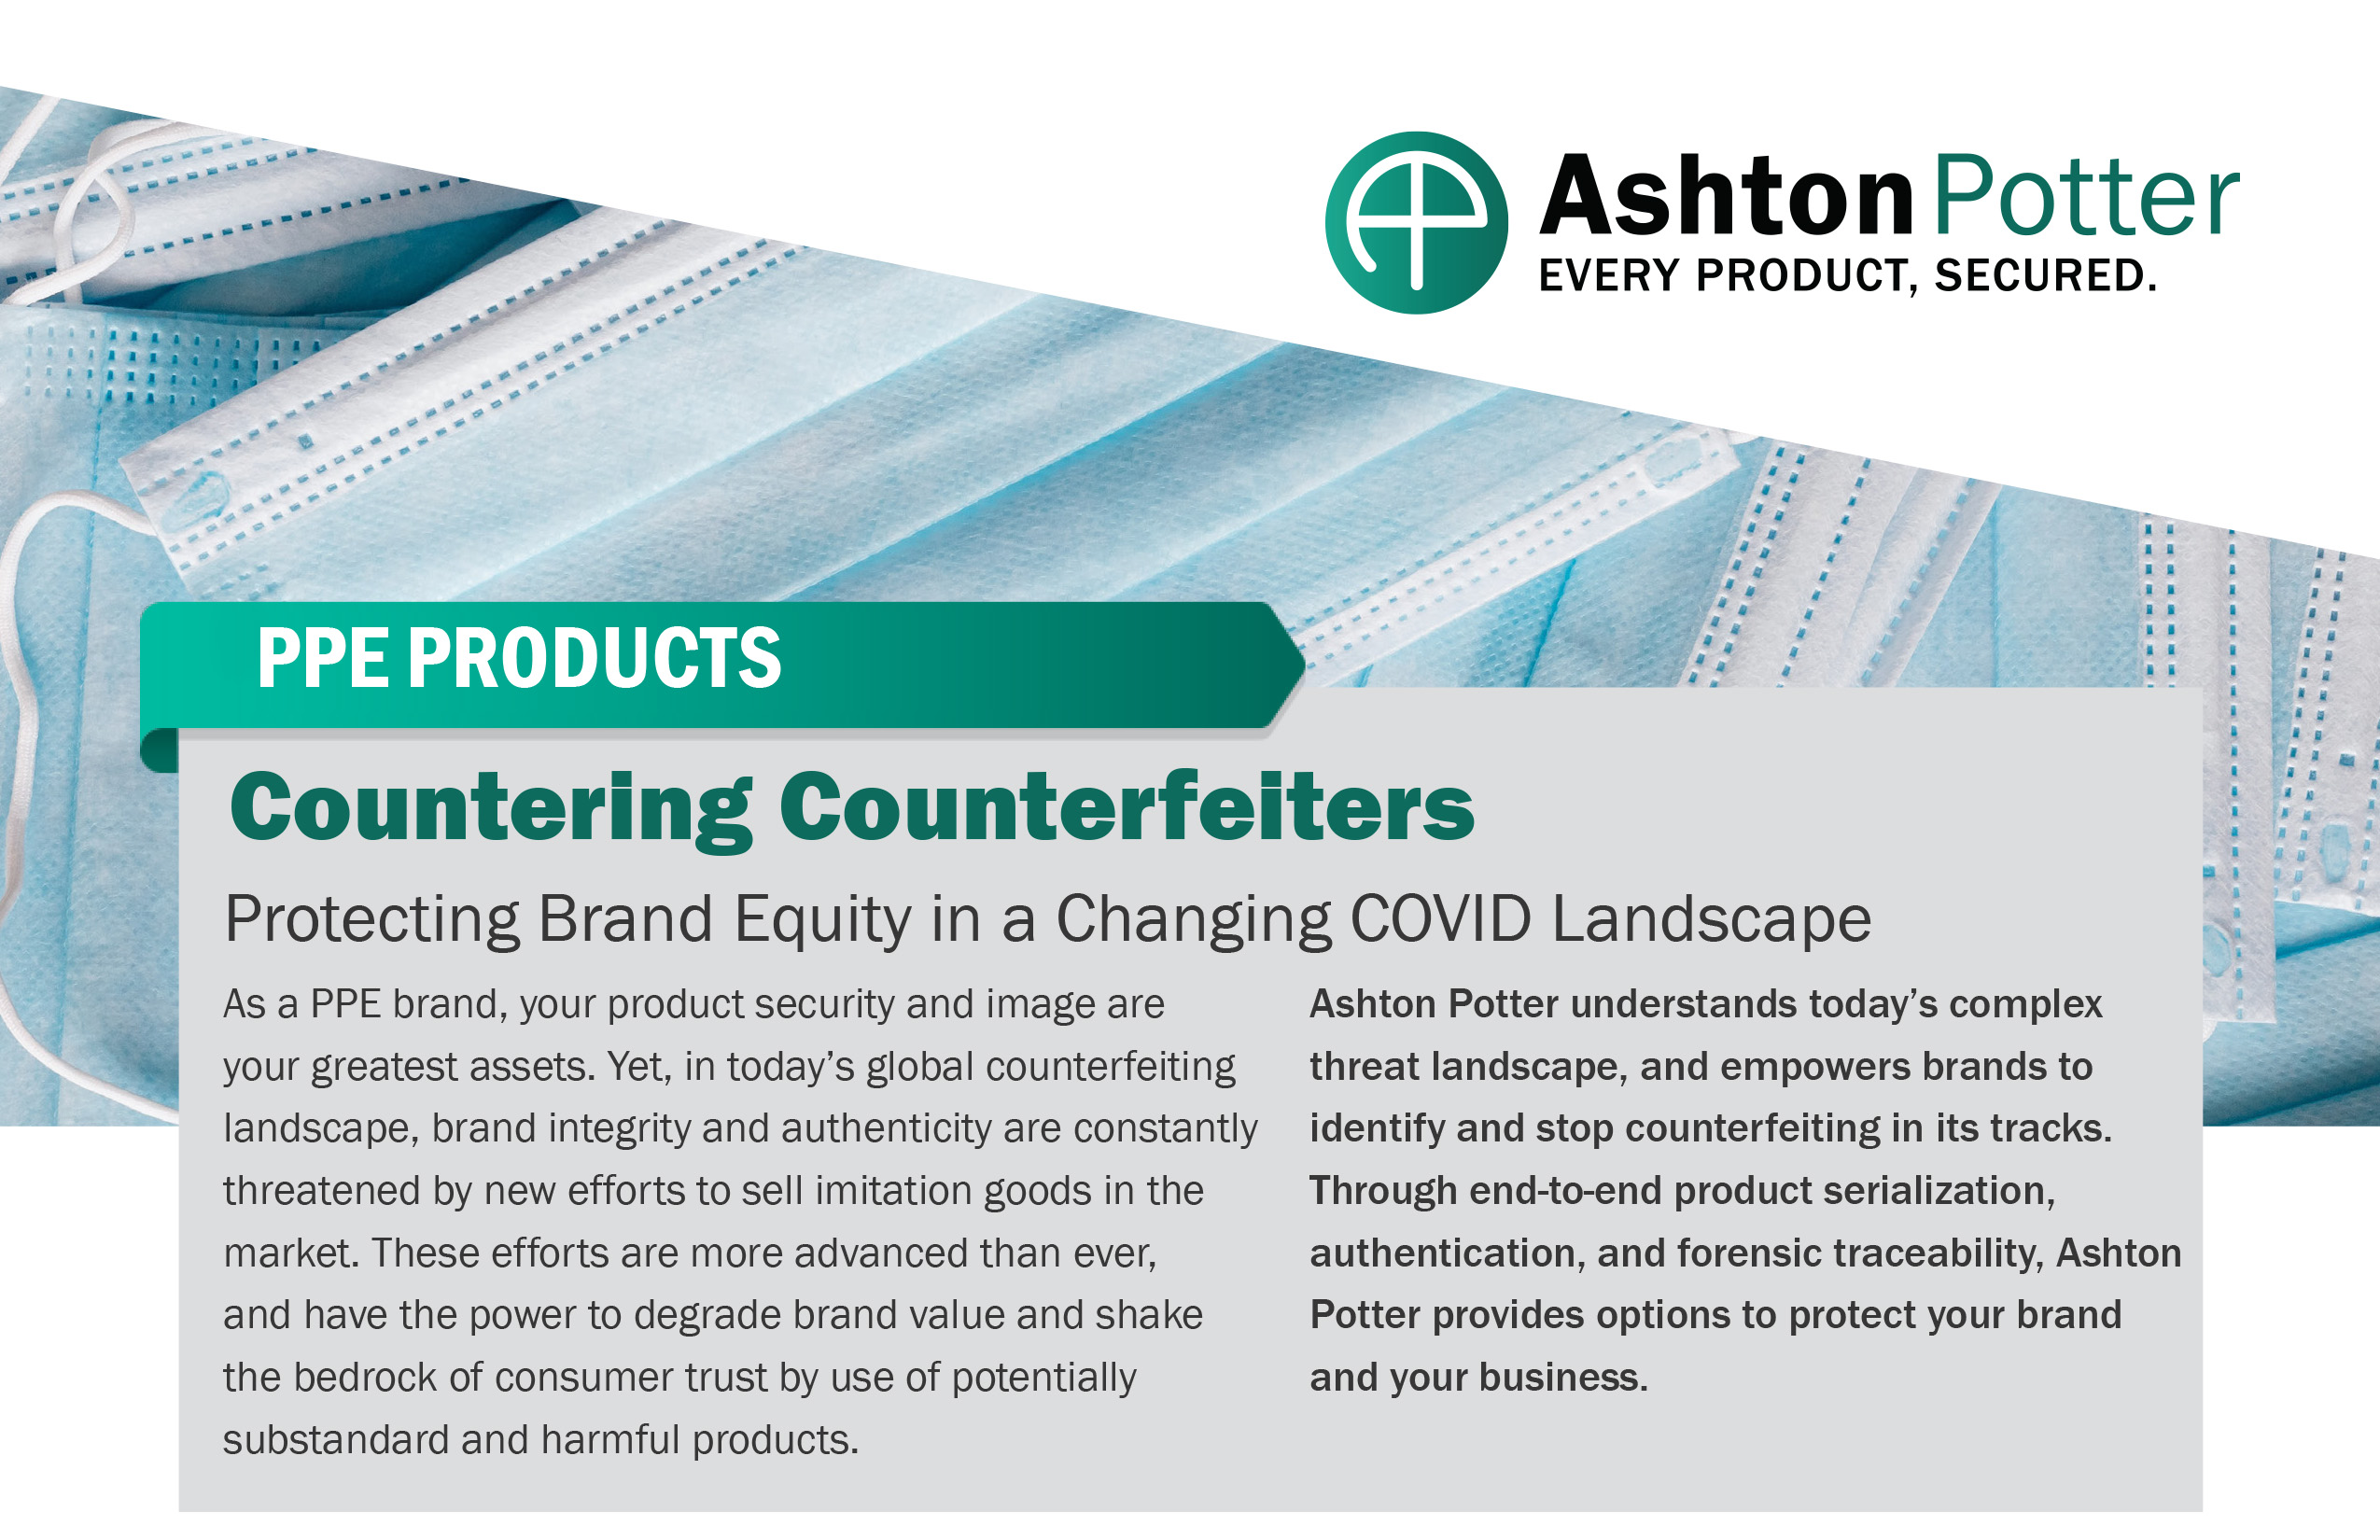 Counter Counterfeiters: Protecting Brand Equity in a Changing COVID Landscape